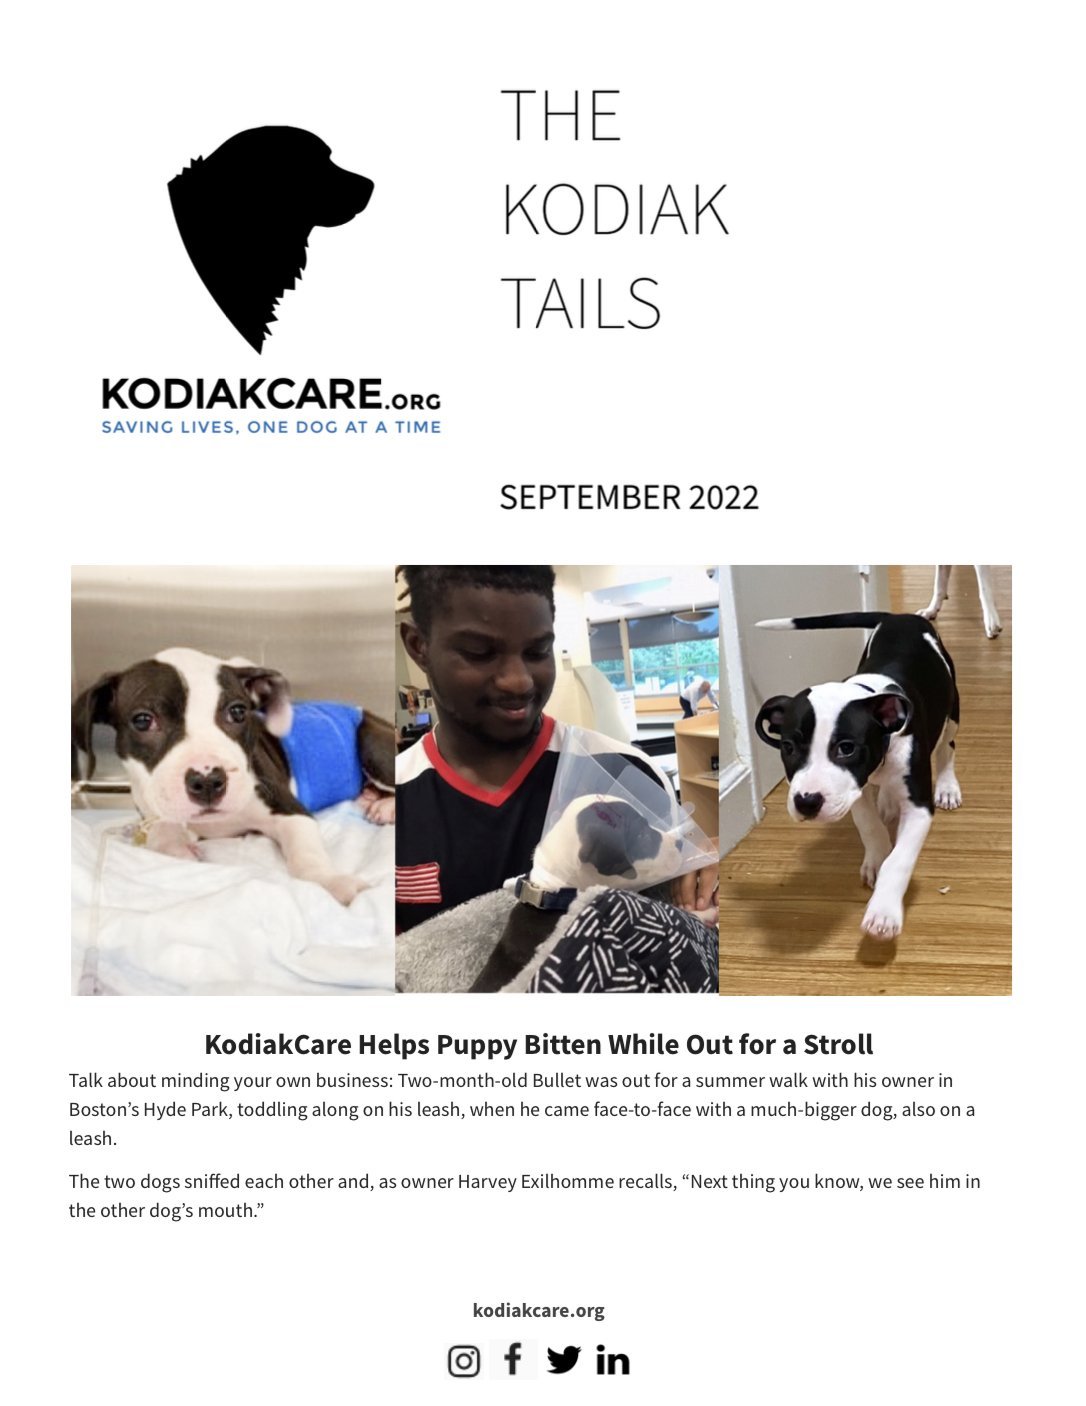 KodiakCare Helps Puppy Bitten While Out for a Stroll. The Kodiak Tails Sept 2022